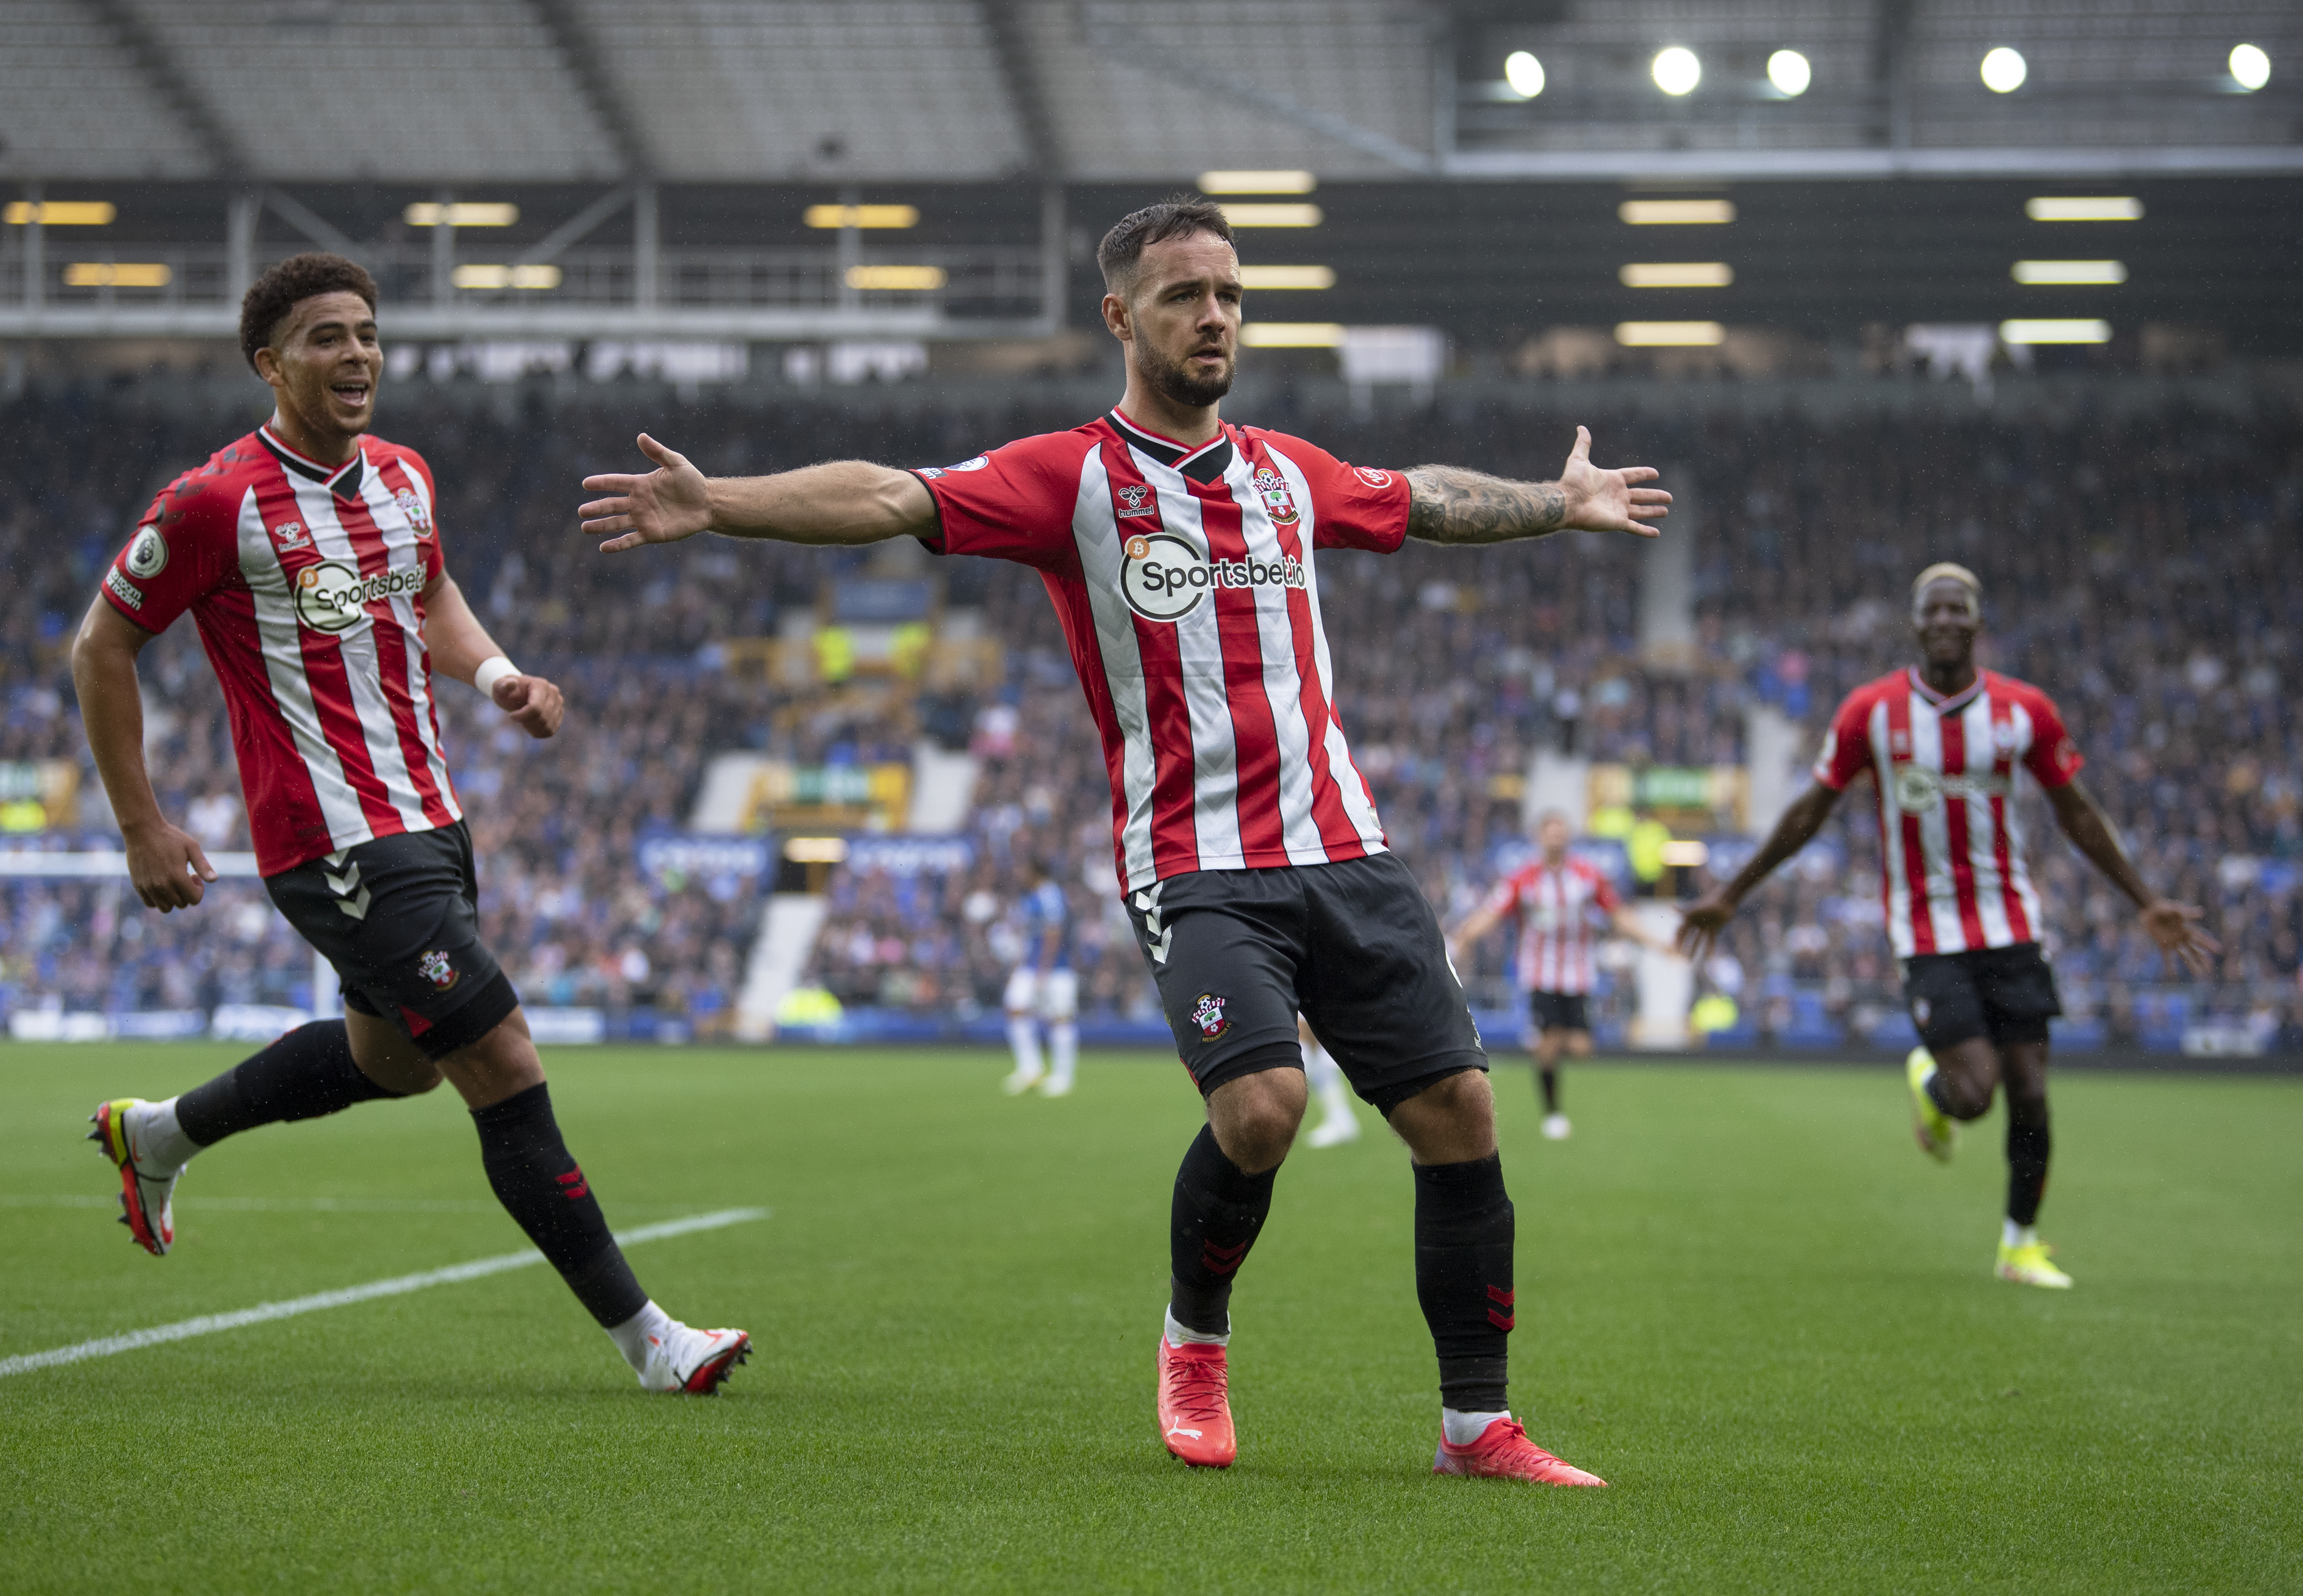 Everton v Southampton - Premier League, match preview, team news, Saints, how to watch on tv, where to stream online, kick off time